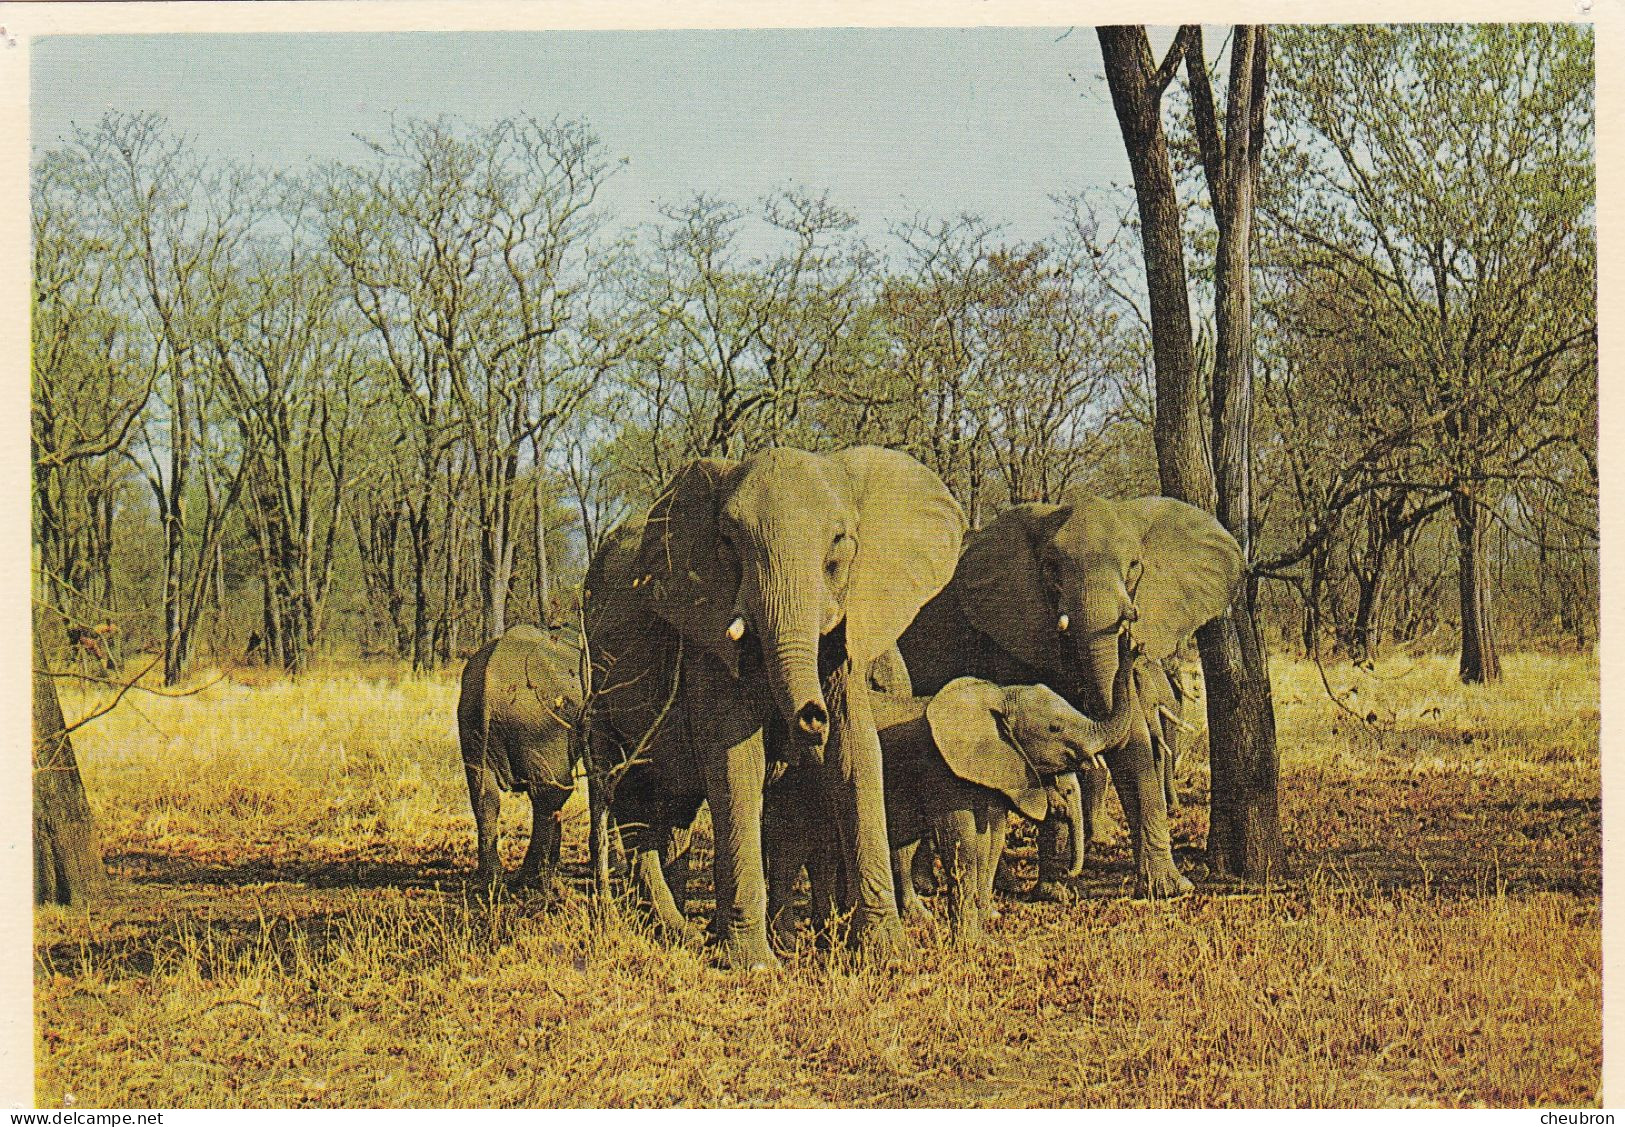 ANIMAUX & FAUNE.  CPSM. ELEPHANTS."HERD OF ELEPHANTS AND THEIR CALVES "  AFRIQUE DU SUD. NATURAL GAME RESERVES - Elefanti